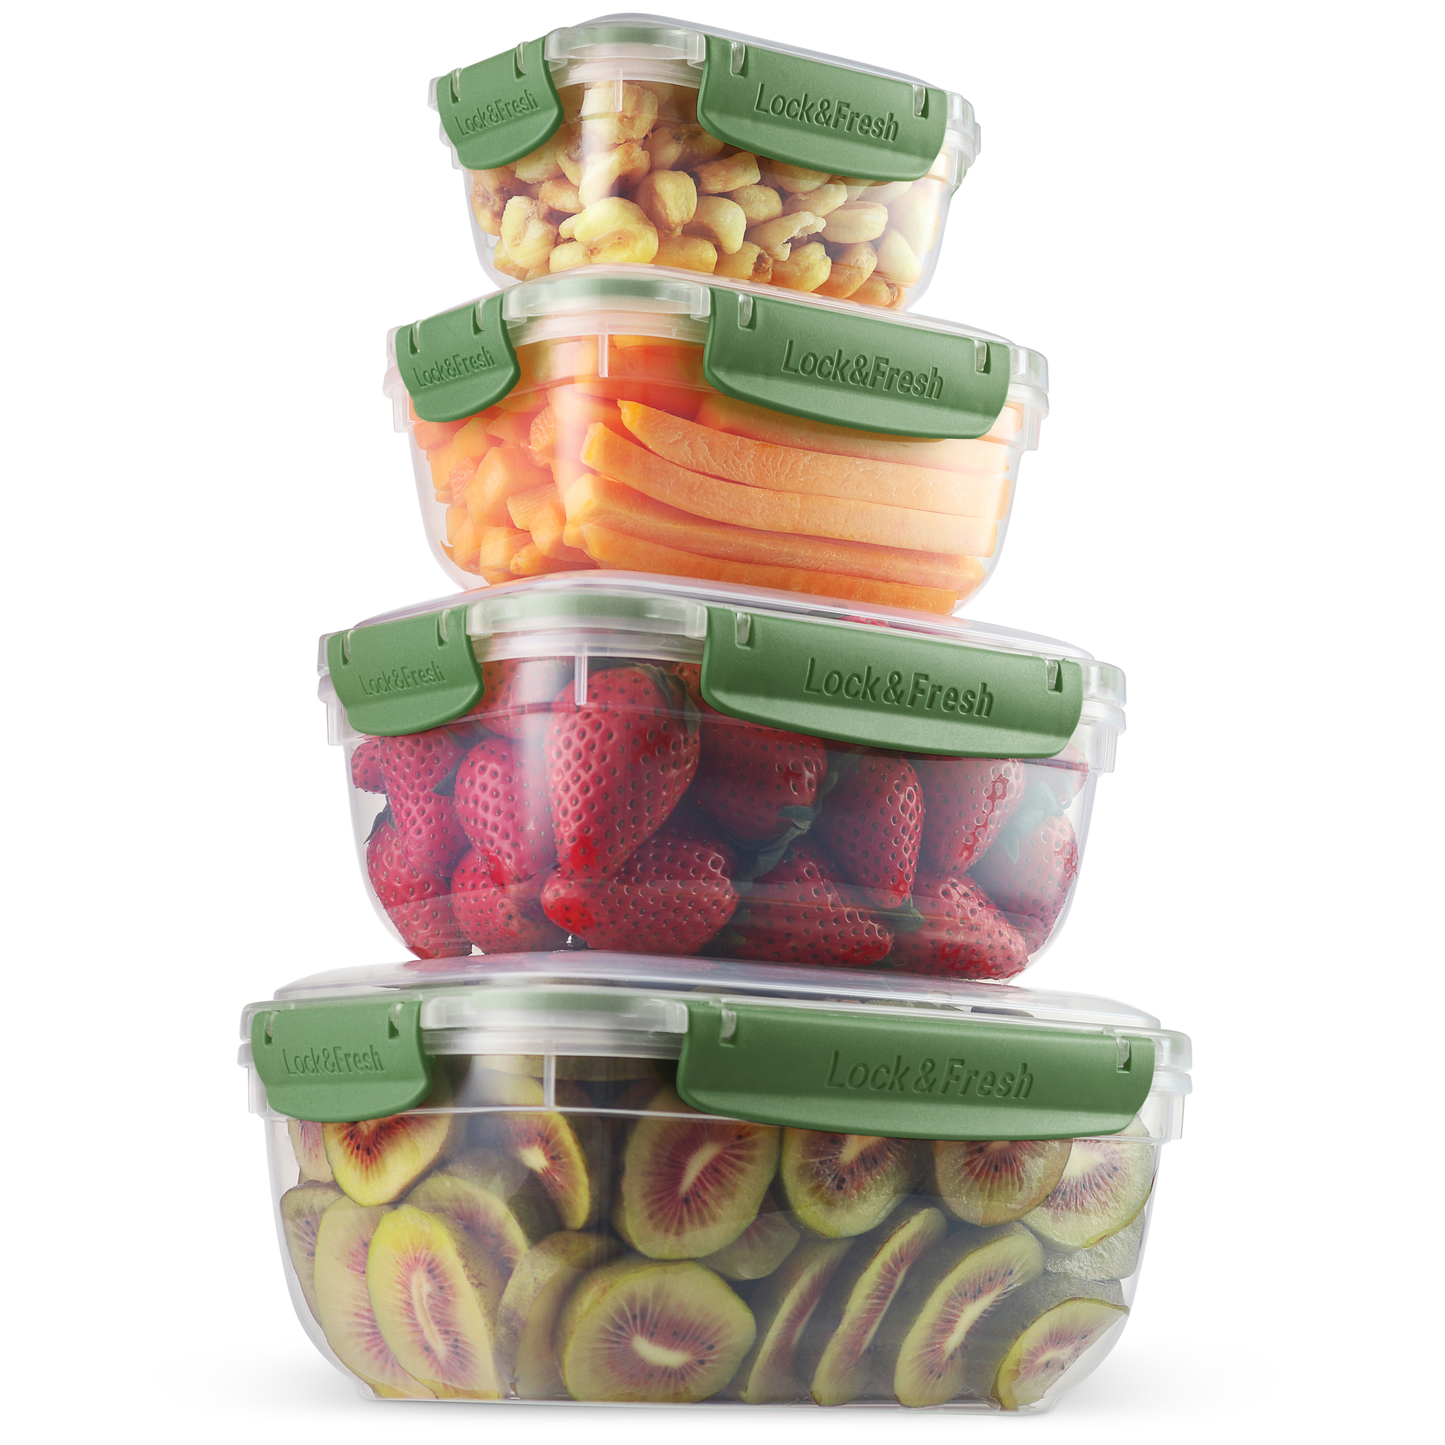 Set of 4 Rectangular Sealed Containers, Green